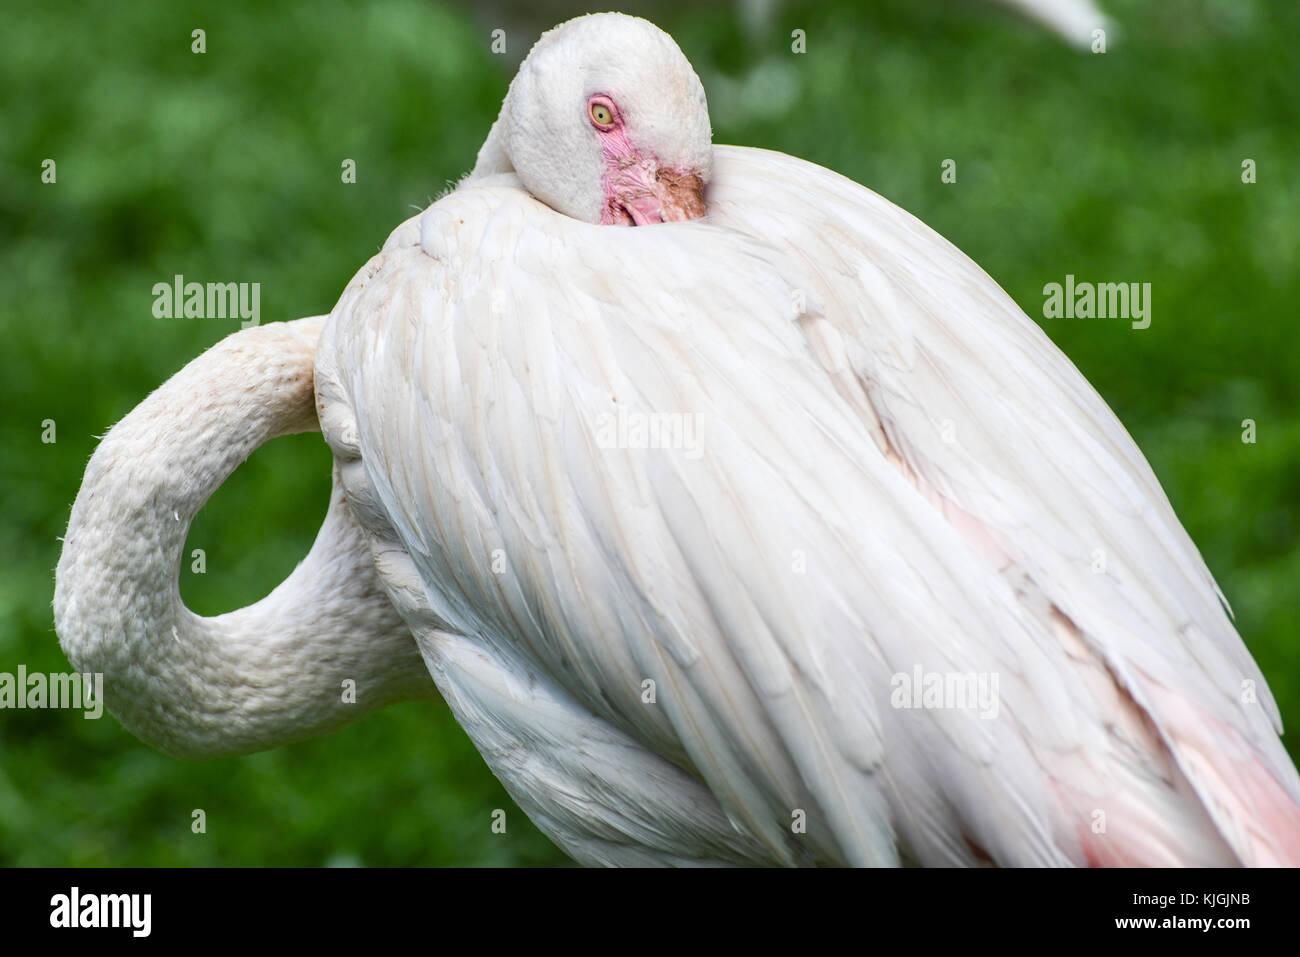 Flamingo with its neck curled up at the Joburg Zoo in Johannesburg, South Africa. Stock Photo